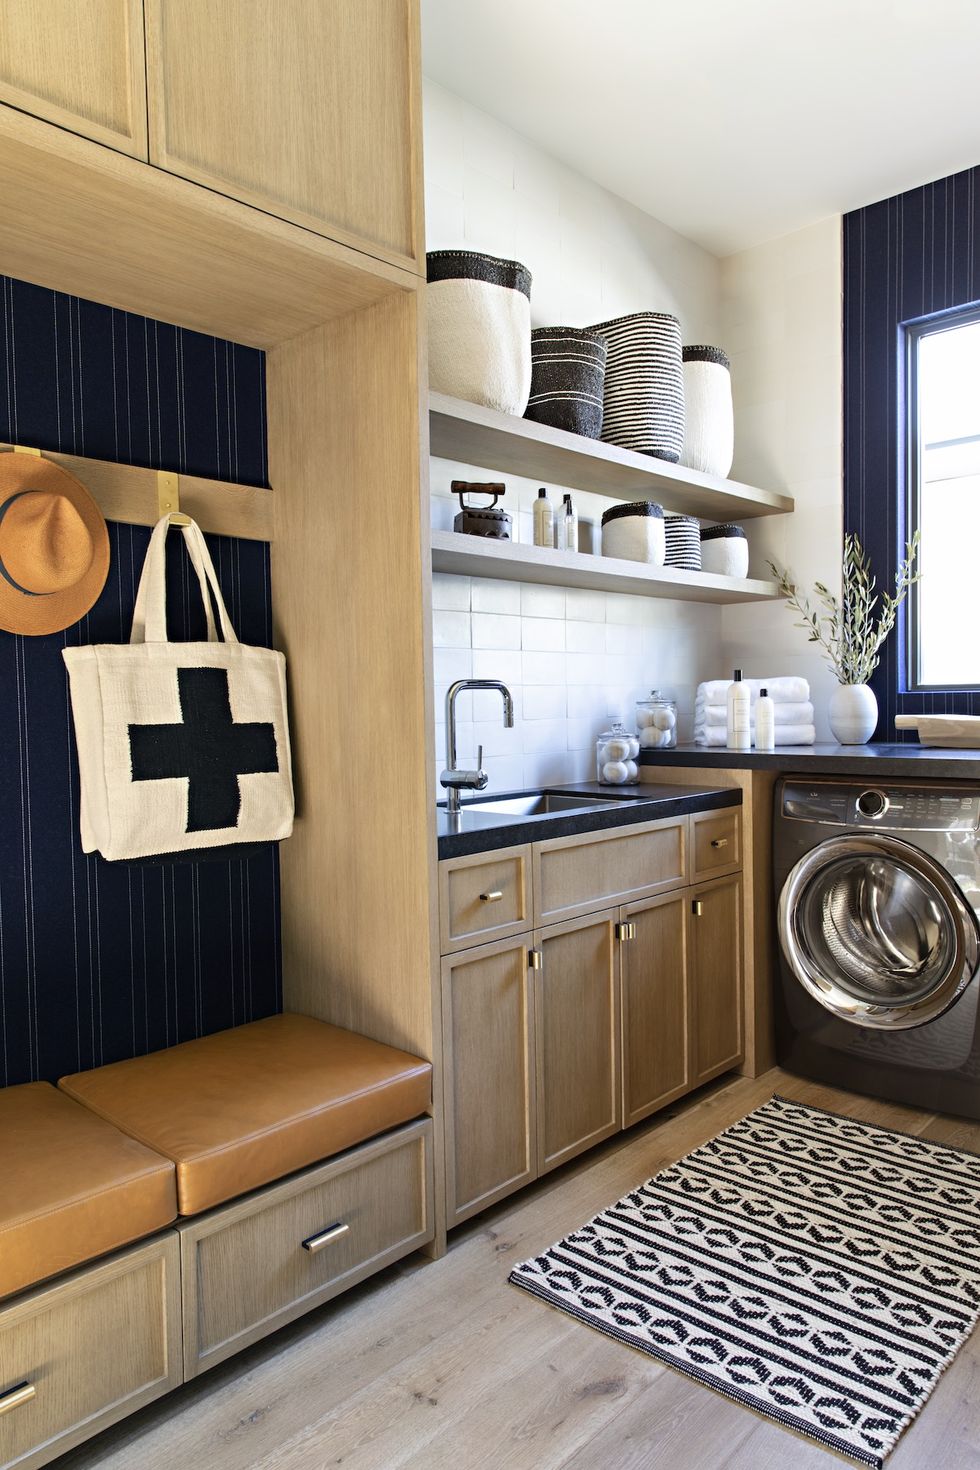 Where to Get Quarters for Laundry {20 Best Ideas}